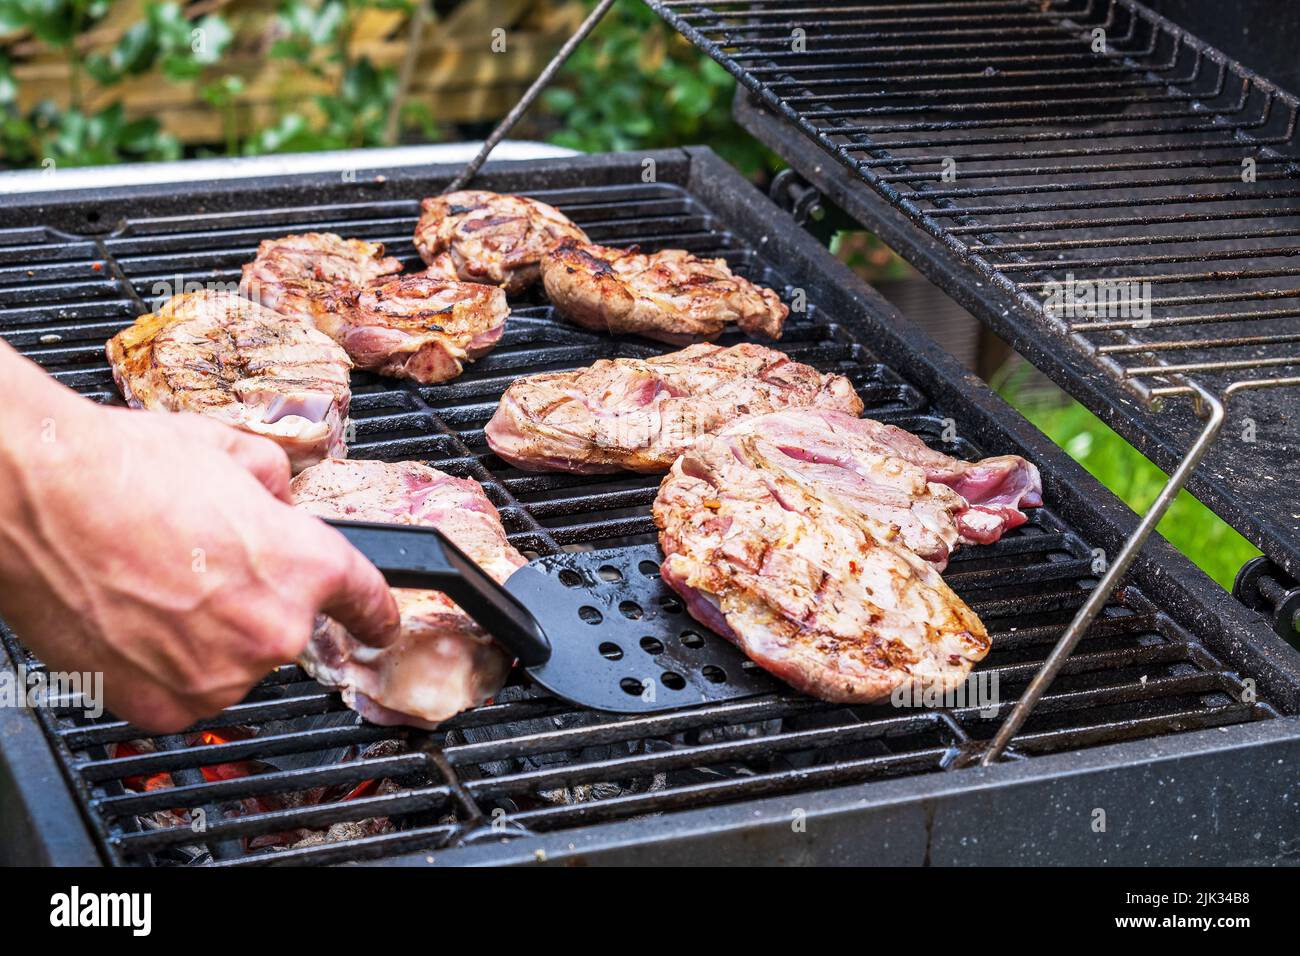 Pieces of fresh raw meat laid out on grill grate. Stock Photo